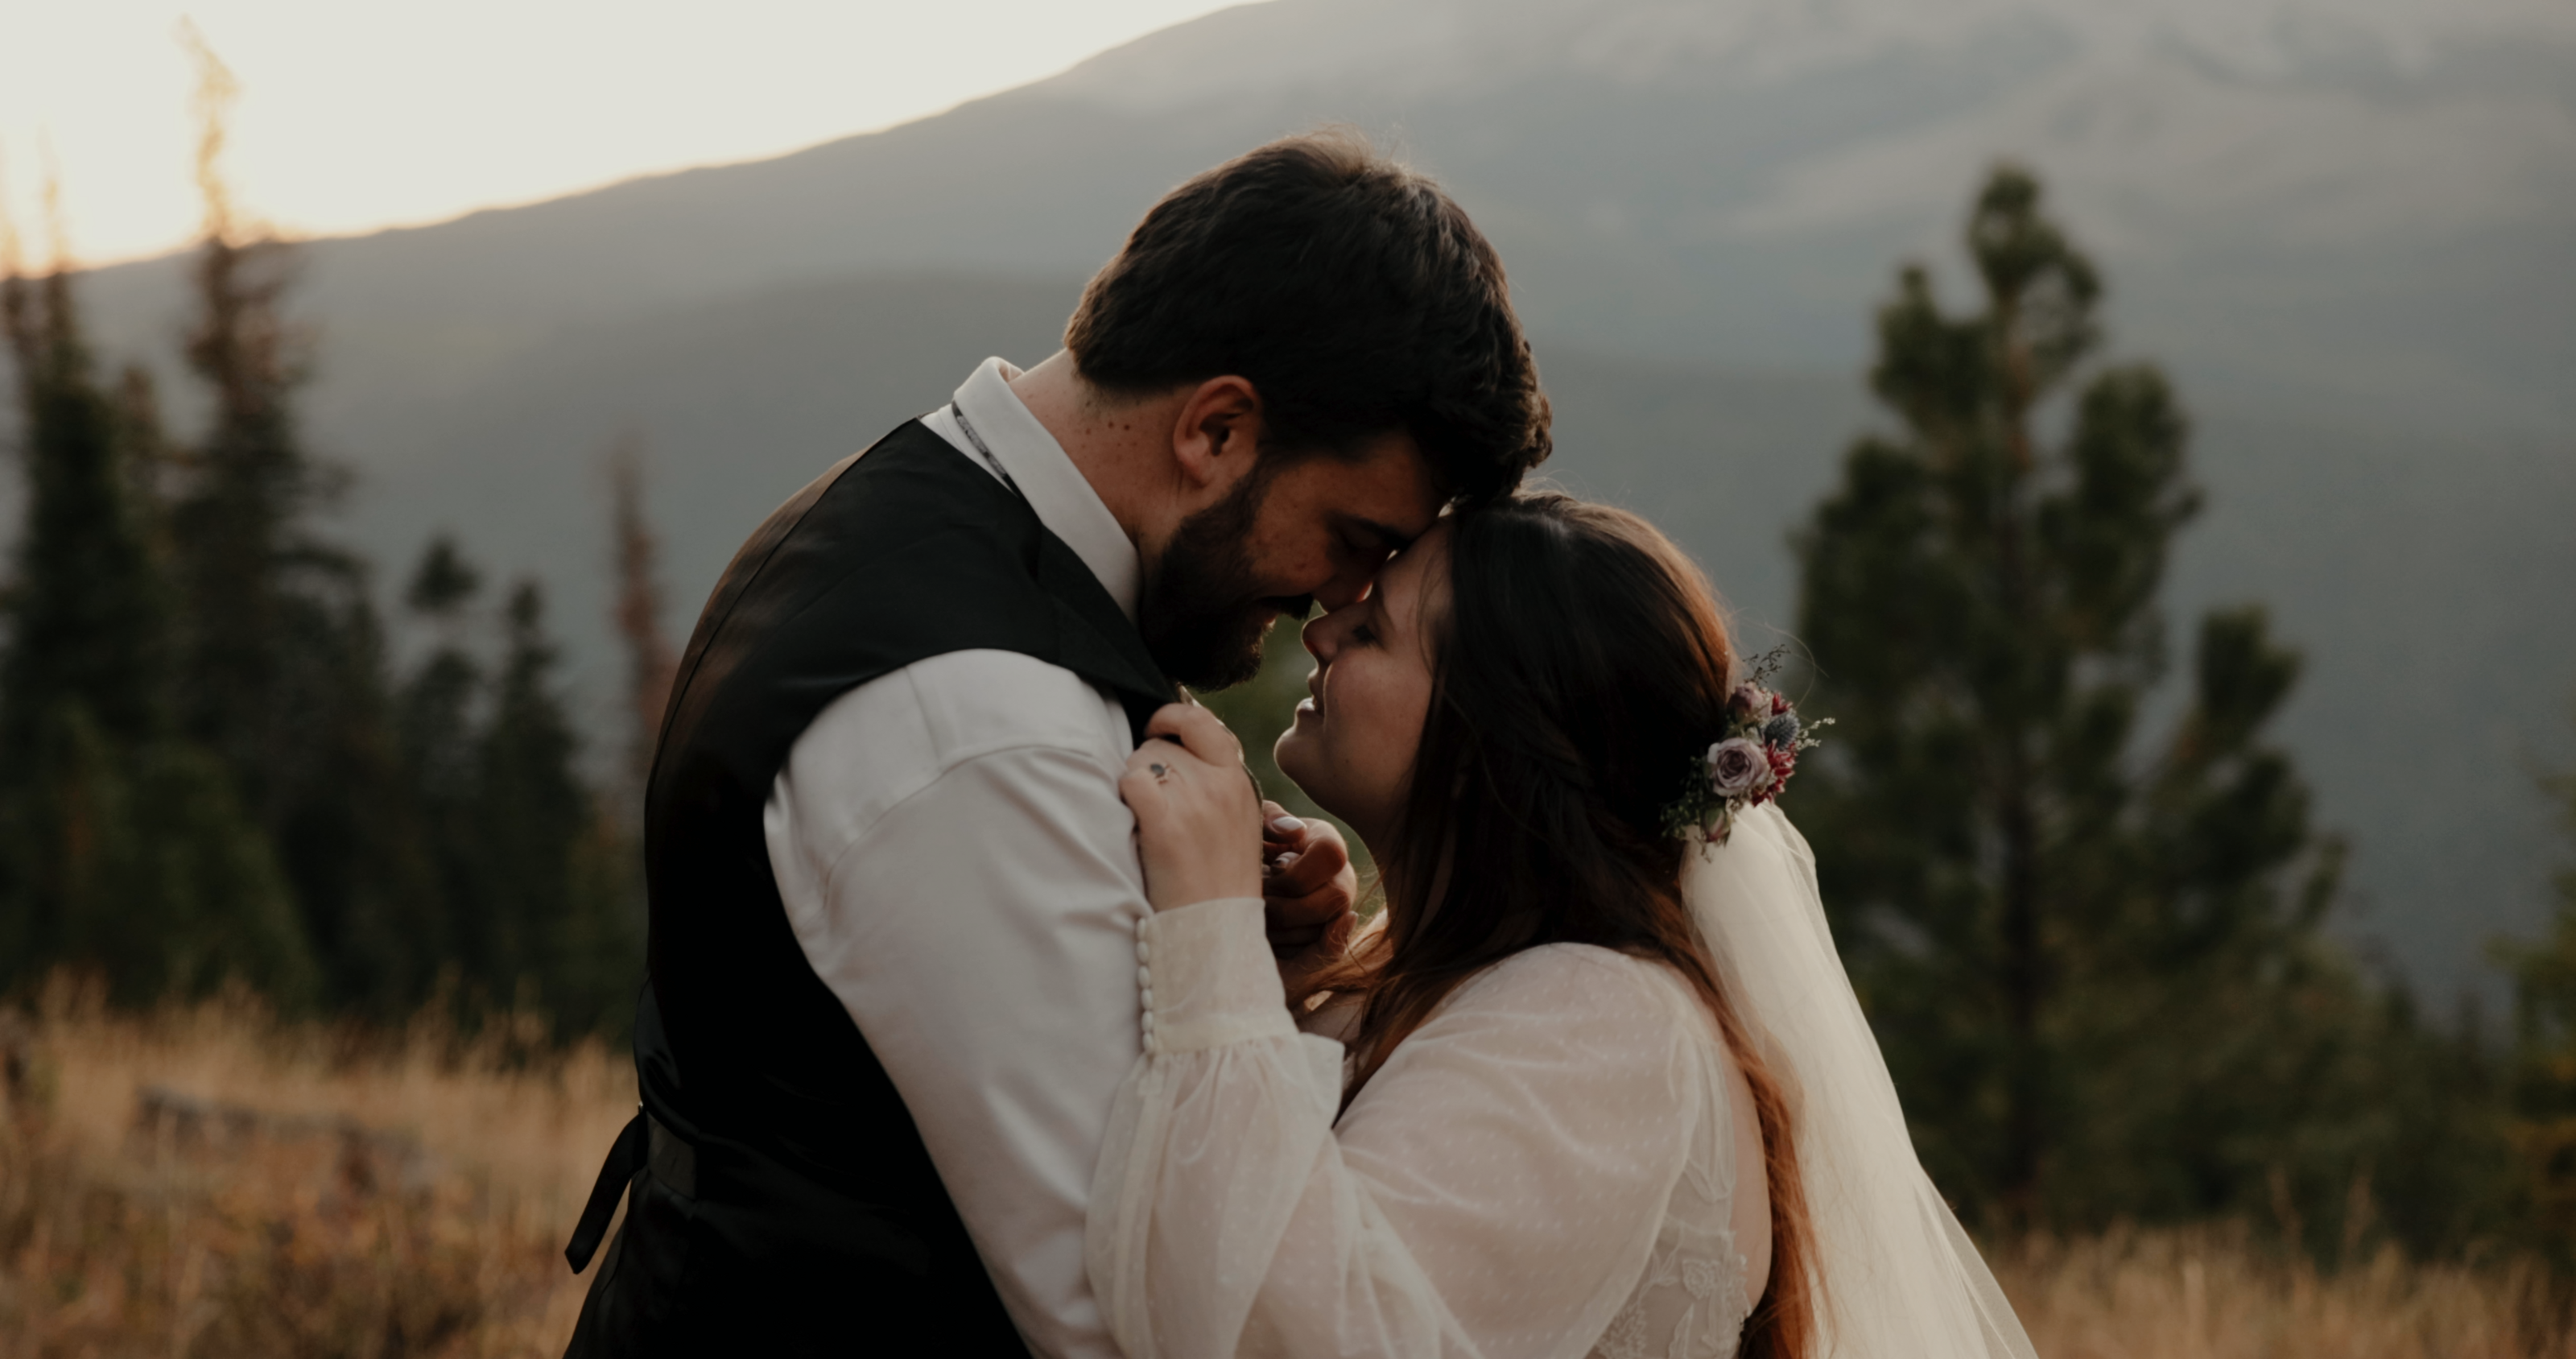 Films By Aly | New England Wedding & Lifestyle Videographer